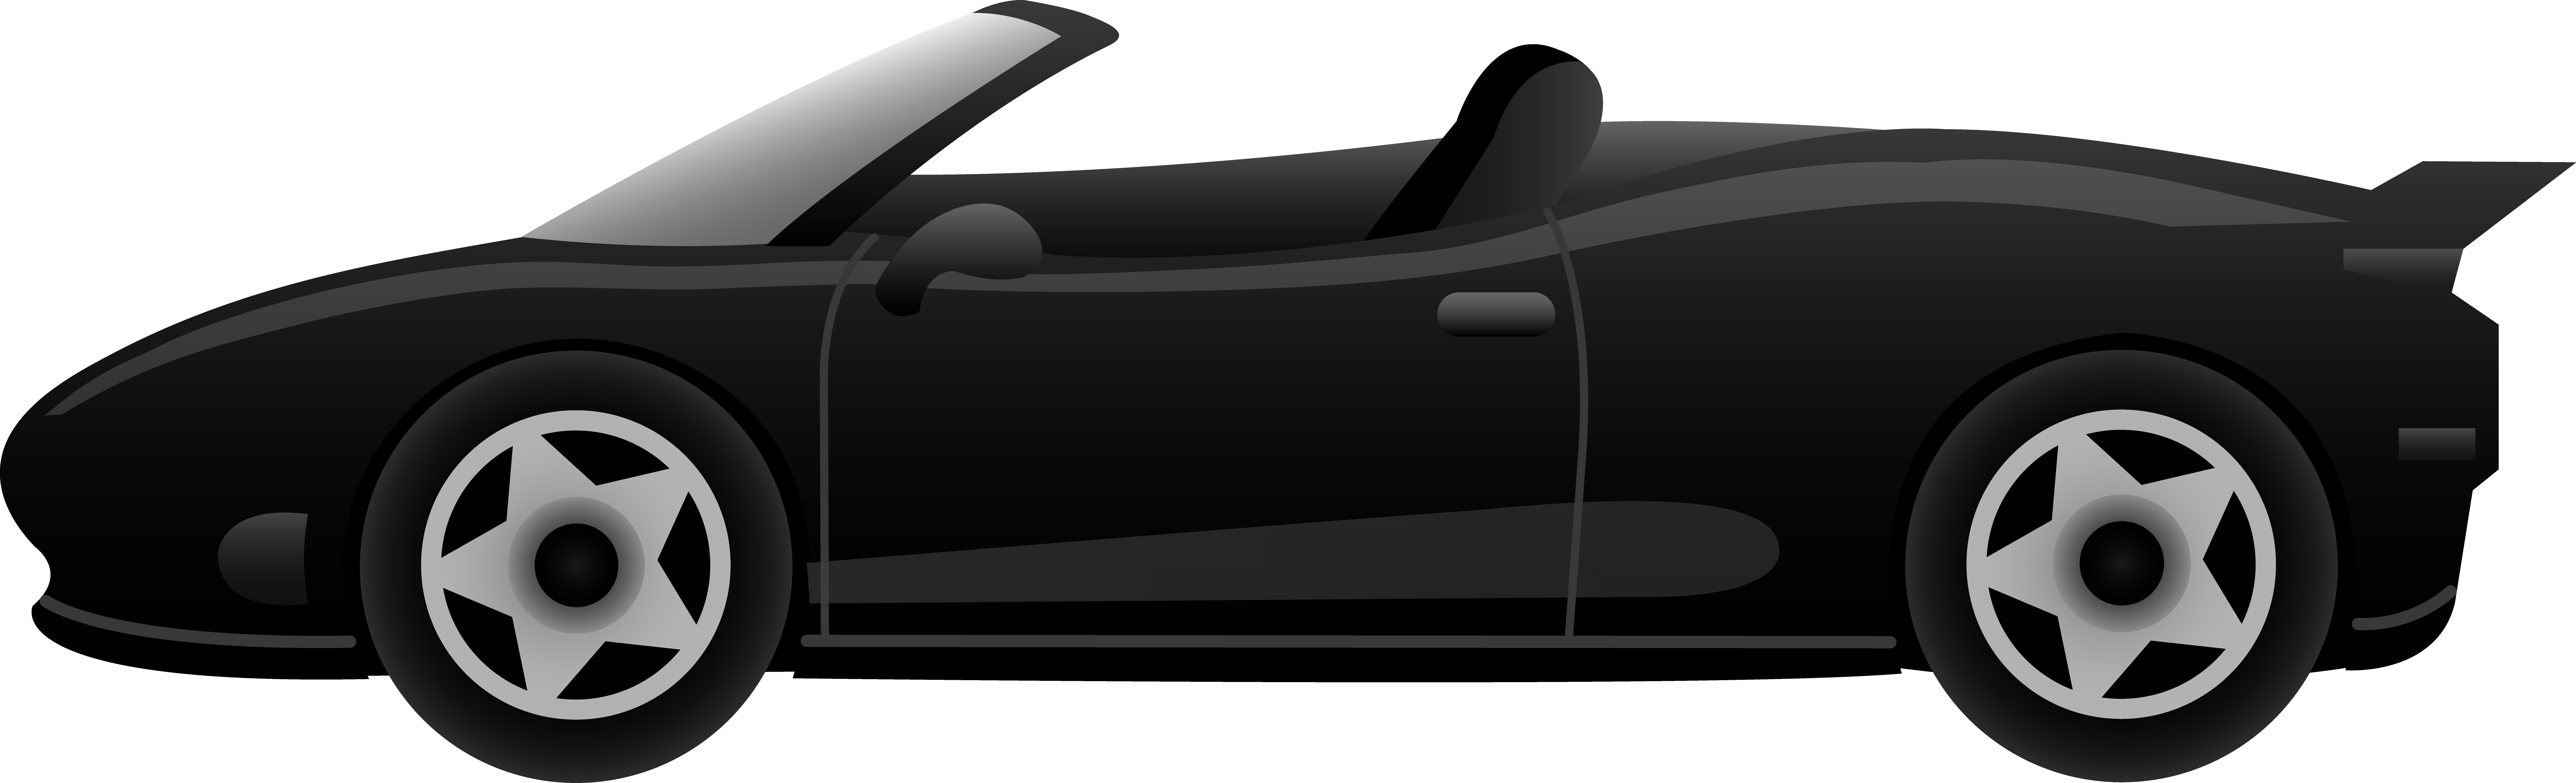 Image of Sports Car Clipart #8478, Sports Car Clipart - Clipartoons